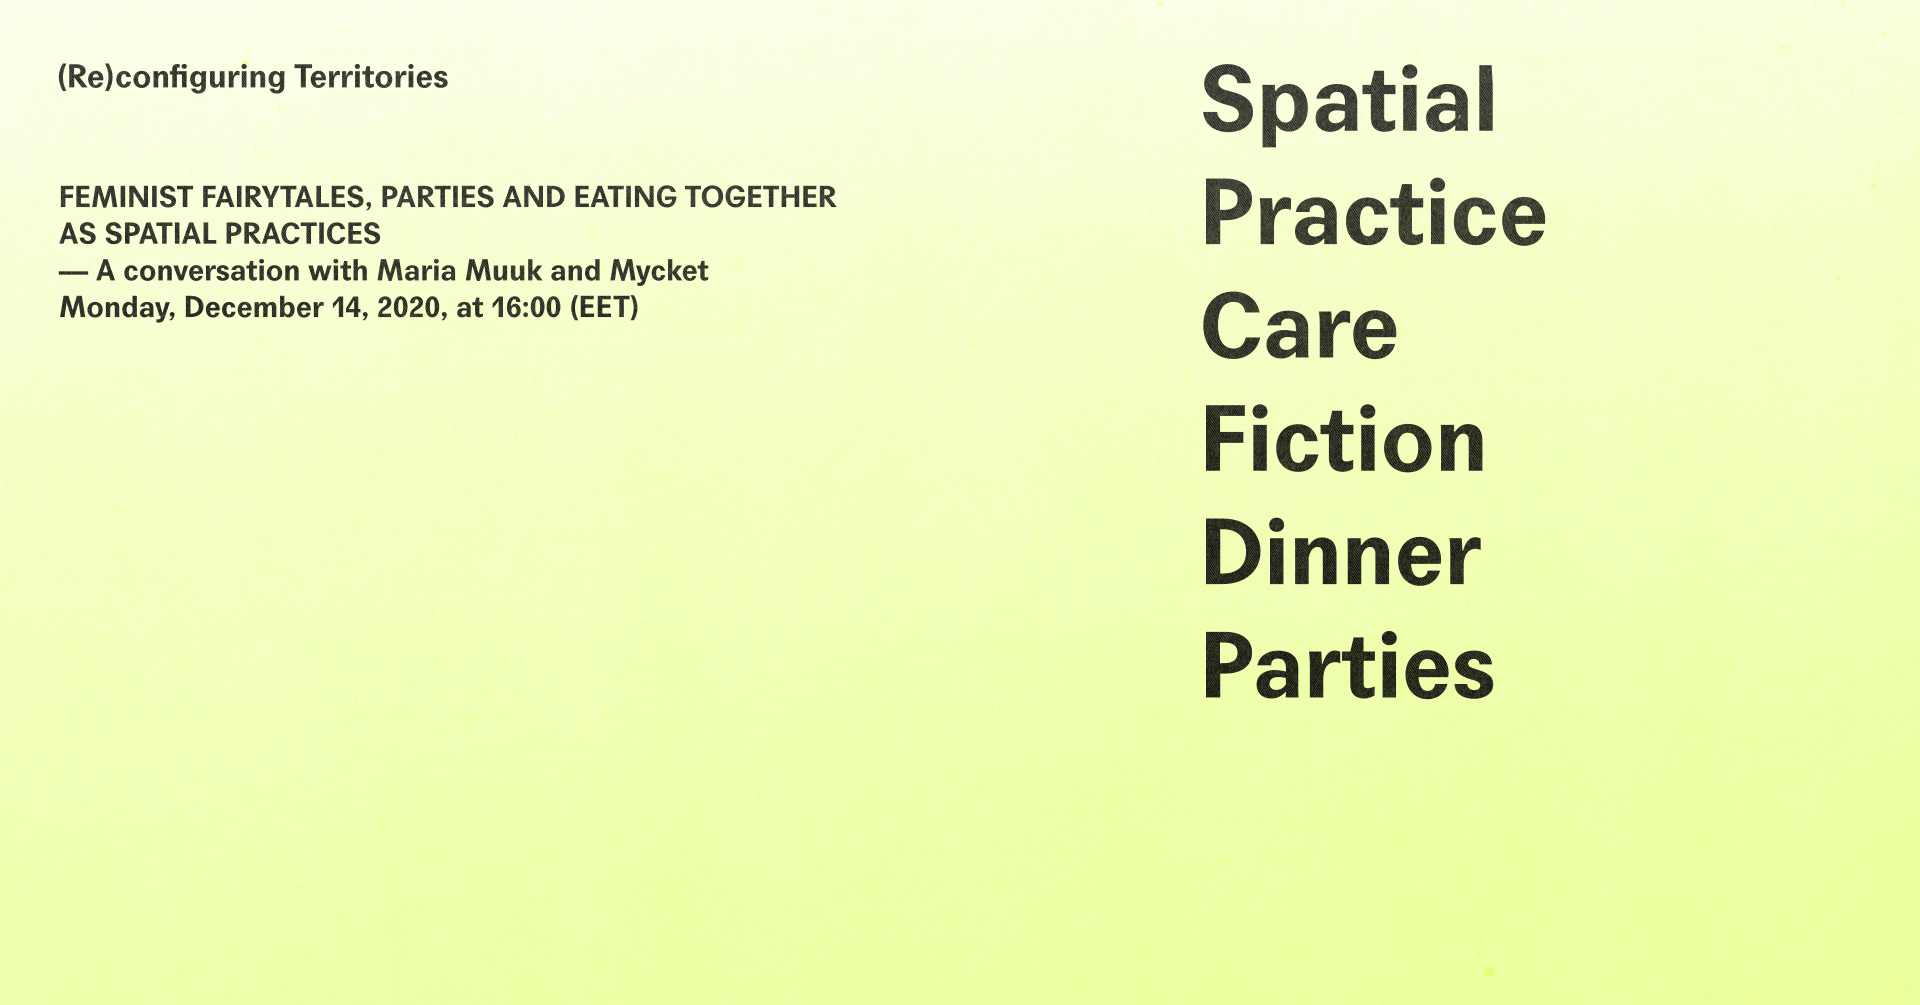 (Re)configuring Territories Talk: Feminist Fairytales, Parties and Eating Together as Spatial Practices